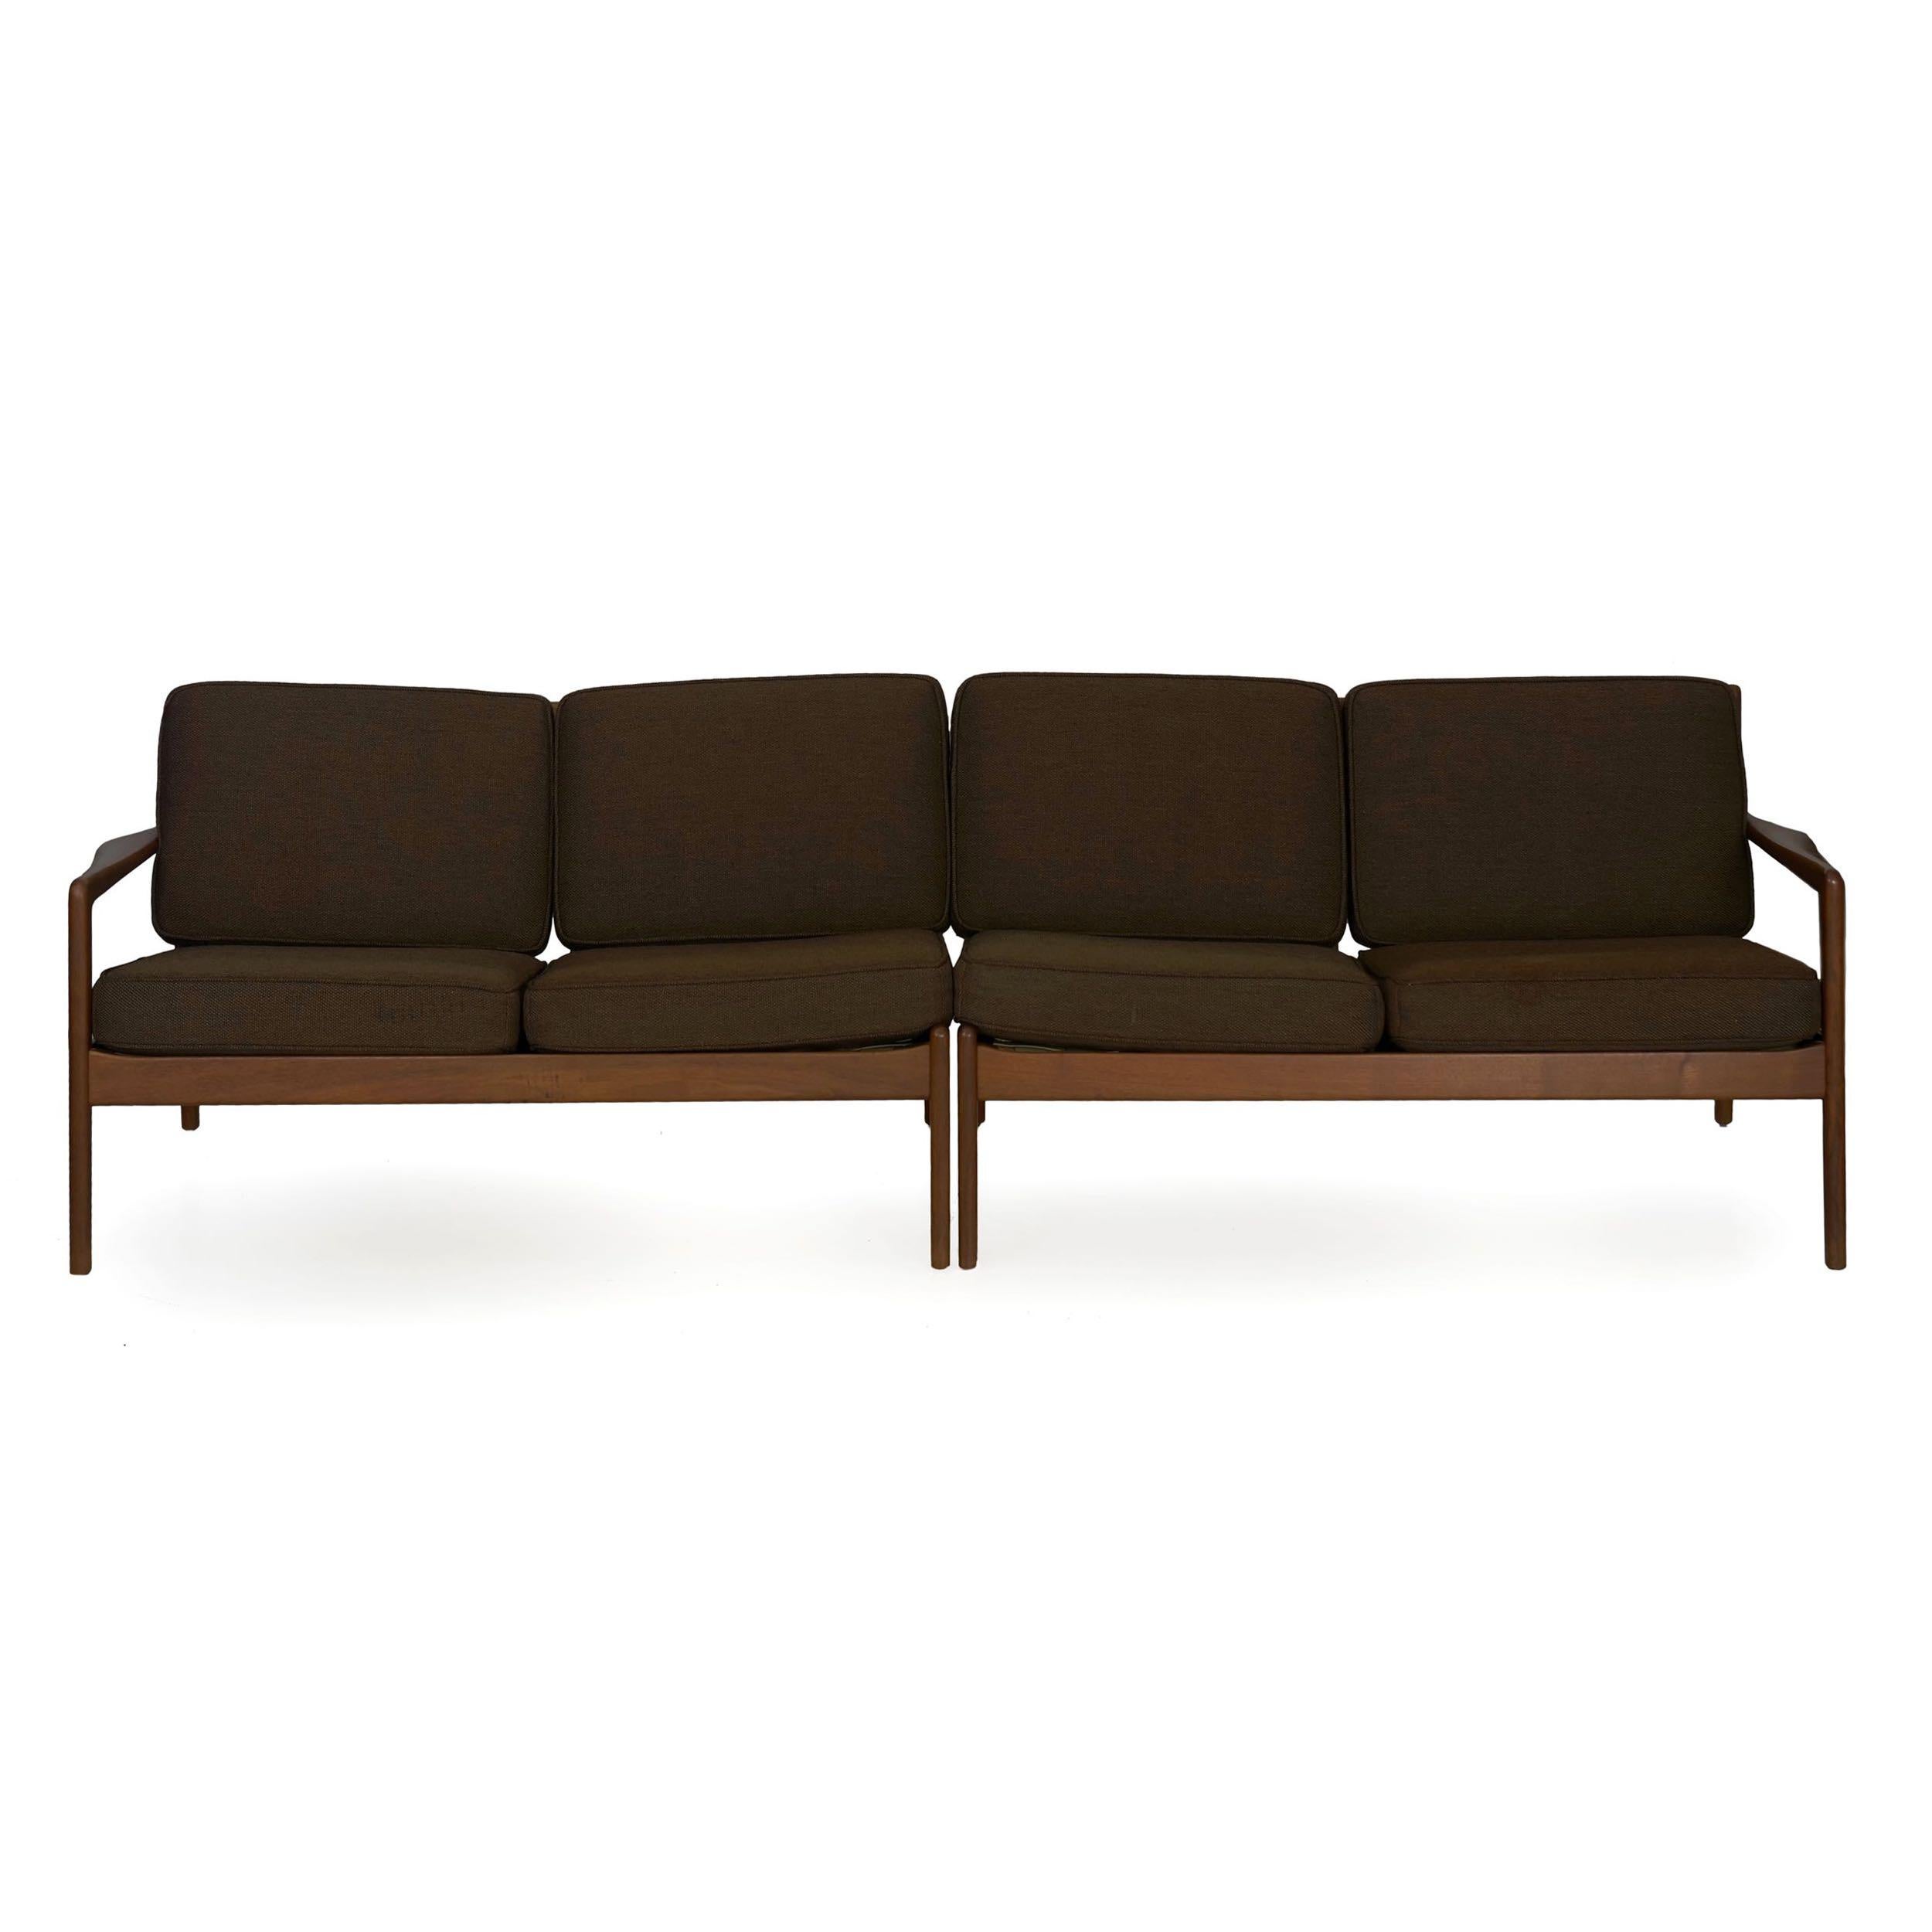 This pair of Mid-Century Modern sofas were designed by Folke Ohlsson for DUX in Sweden, an interesting design that allows them to operate either as a pair of loveseats, as a sectional with a table in the corner between them, or as a single long sofa